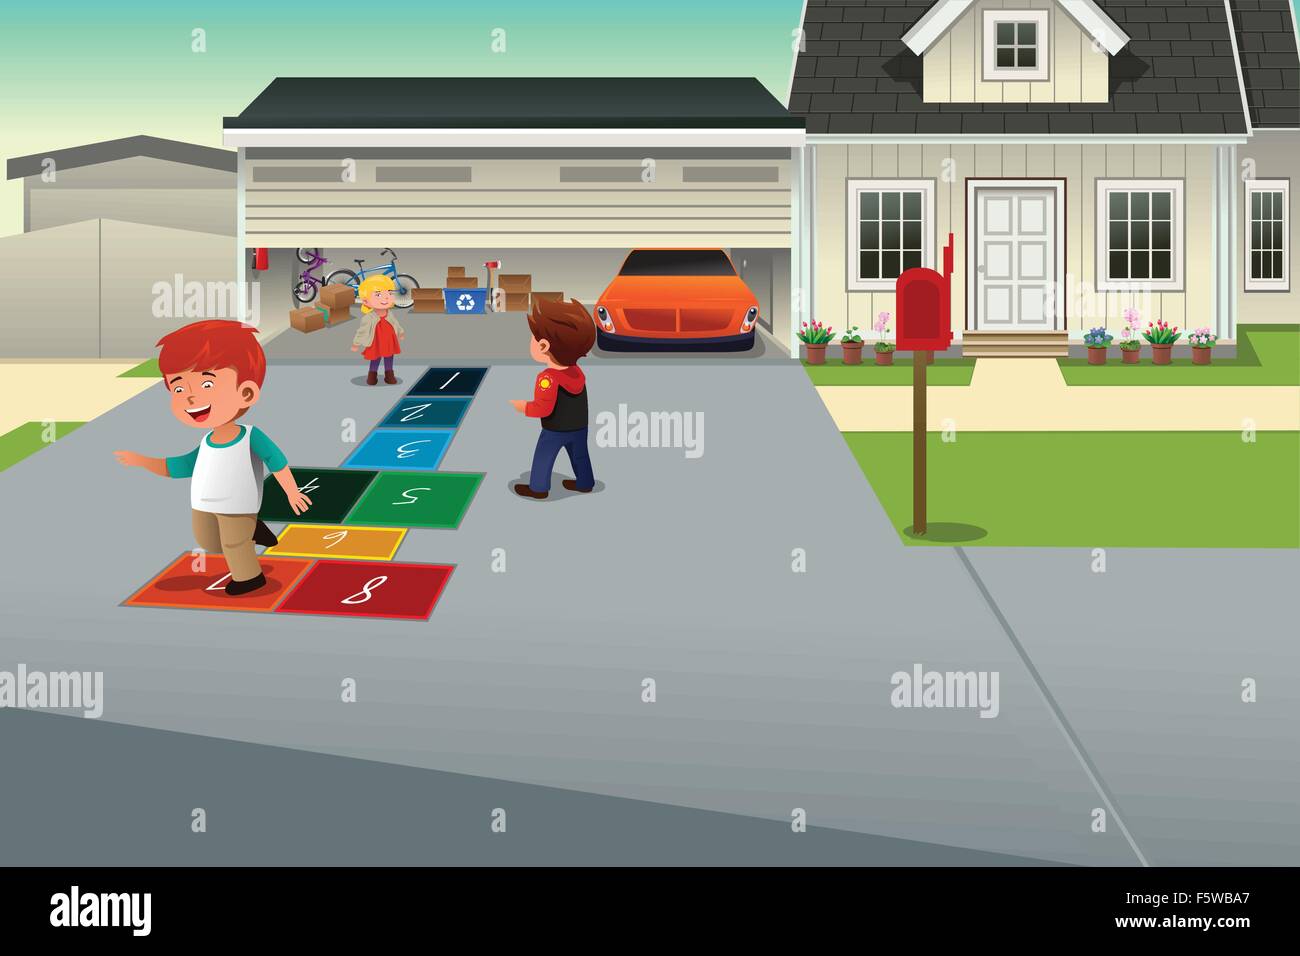 A vector illustration of kids playing hopscotch on the driveway of a suburban house Stock Vector